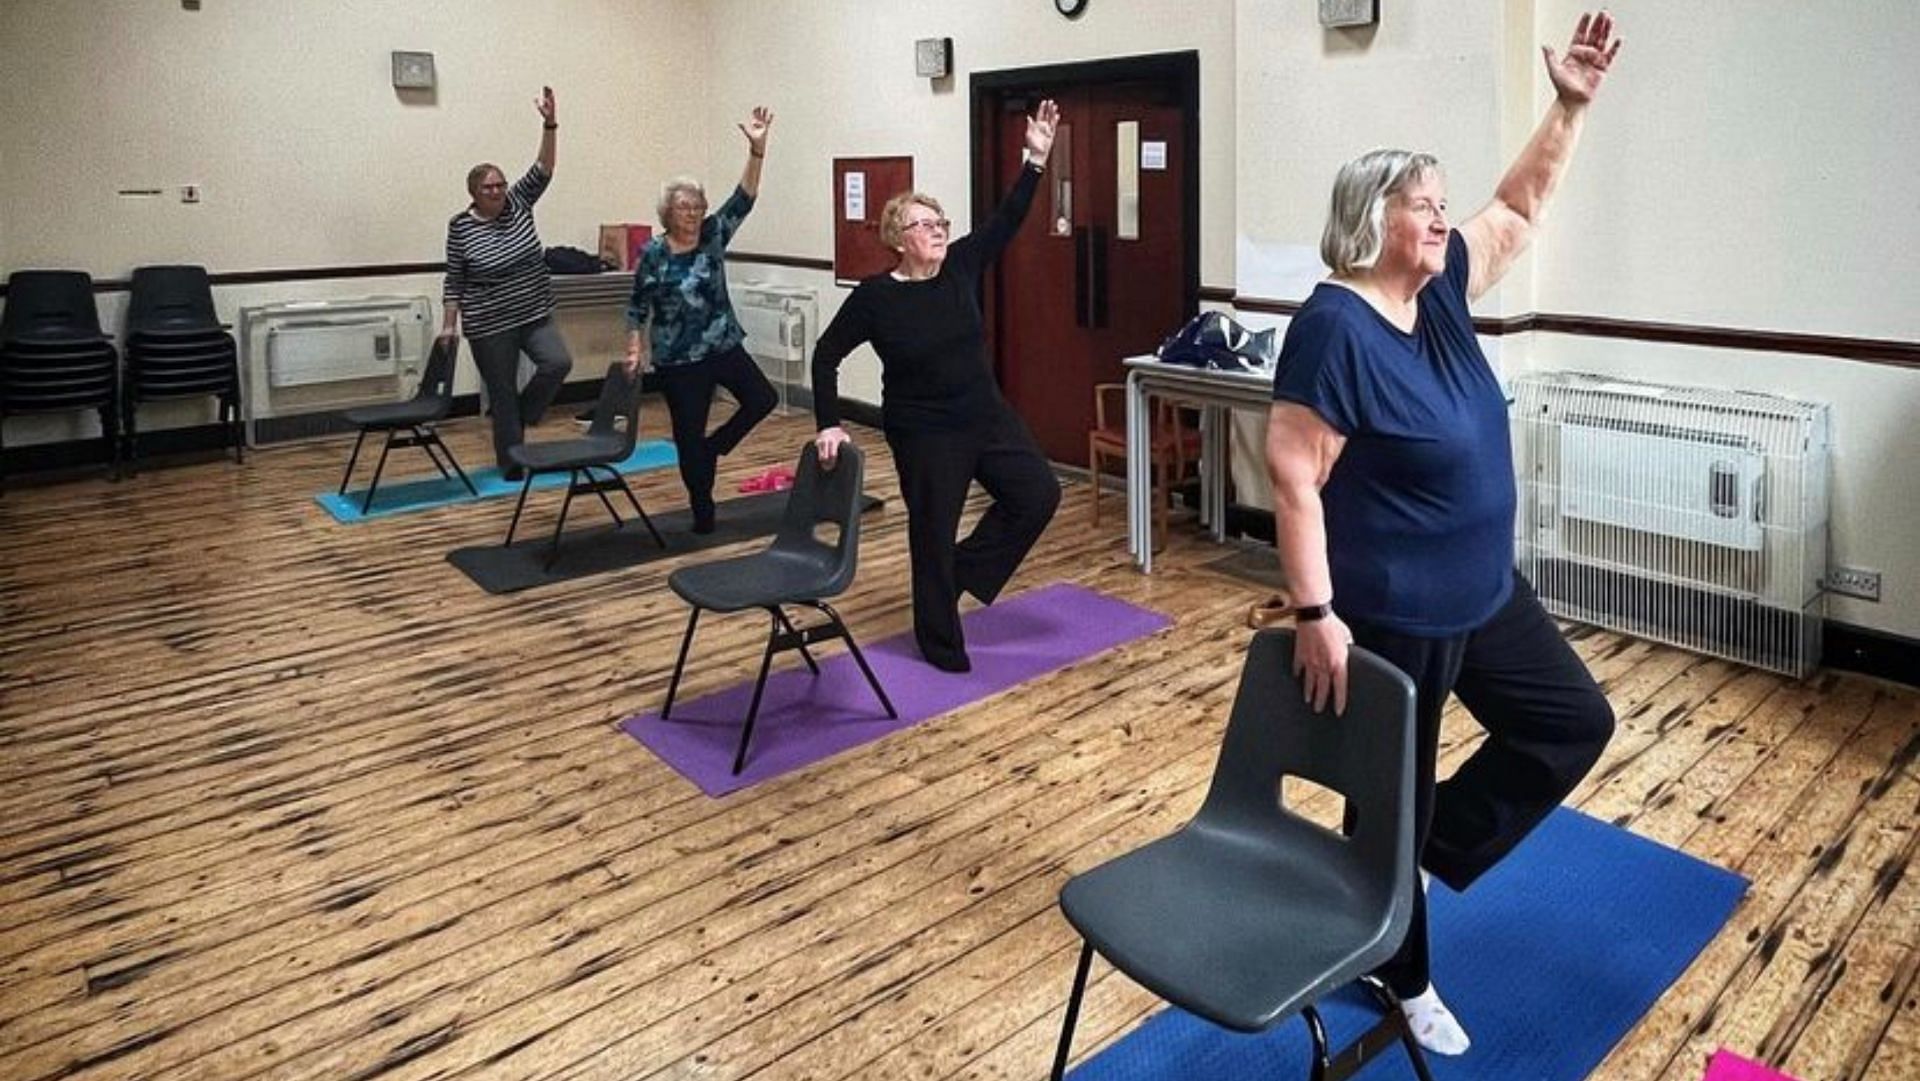 Chair yoga poses for seniors offer great benefits. (Image by @thepixelchef via Instagram)